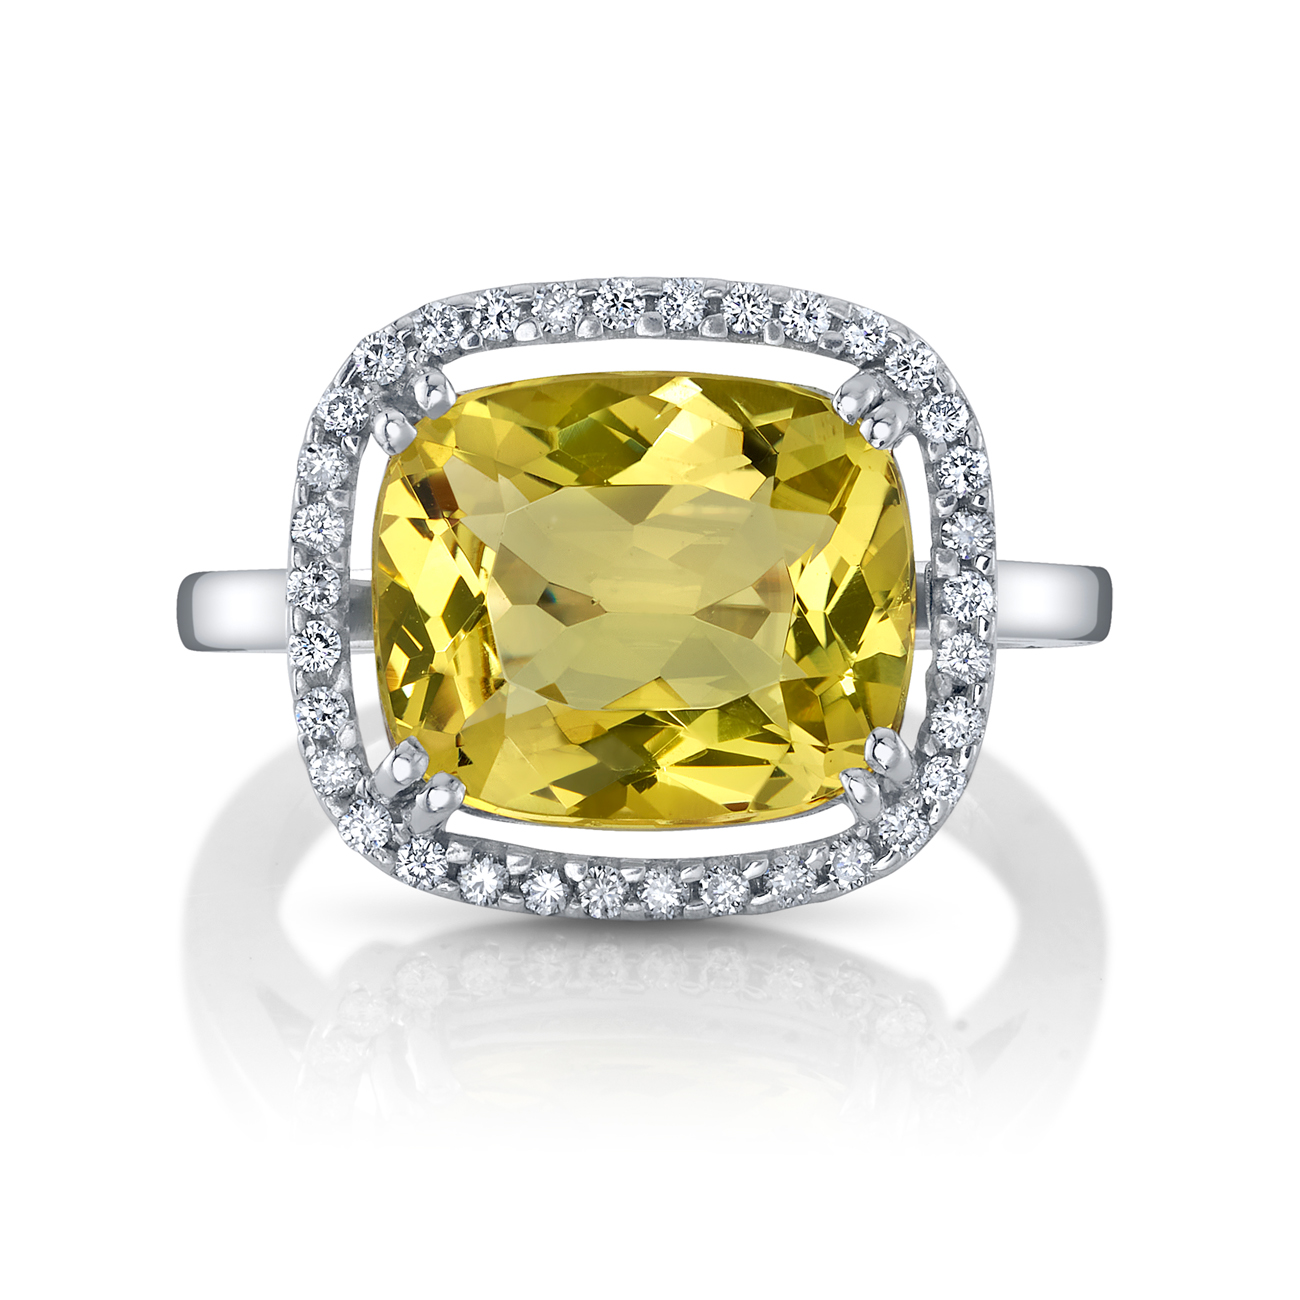 Luxury Fine Jewelers in Dallas, TX and Houston, TX